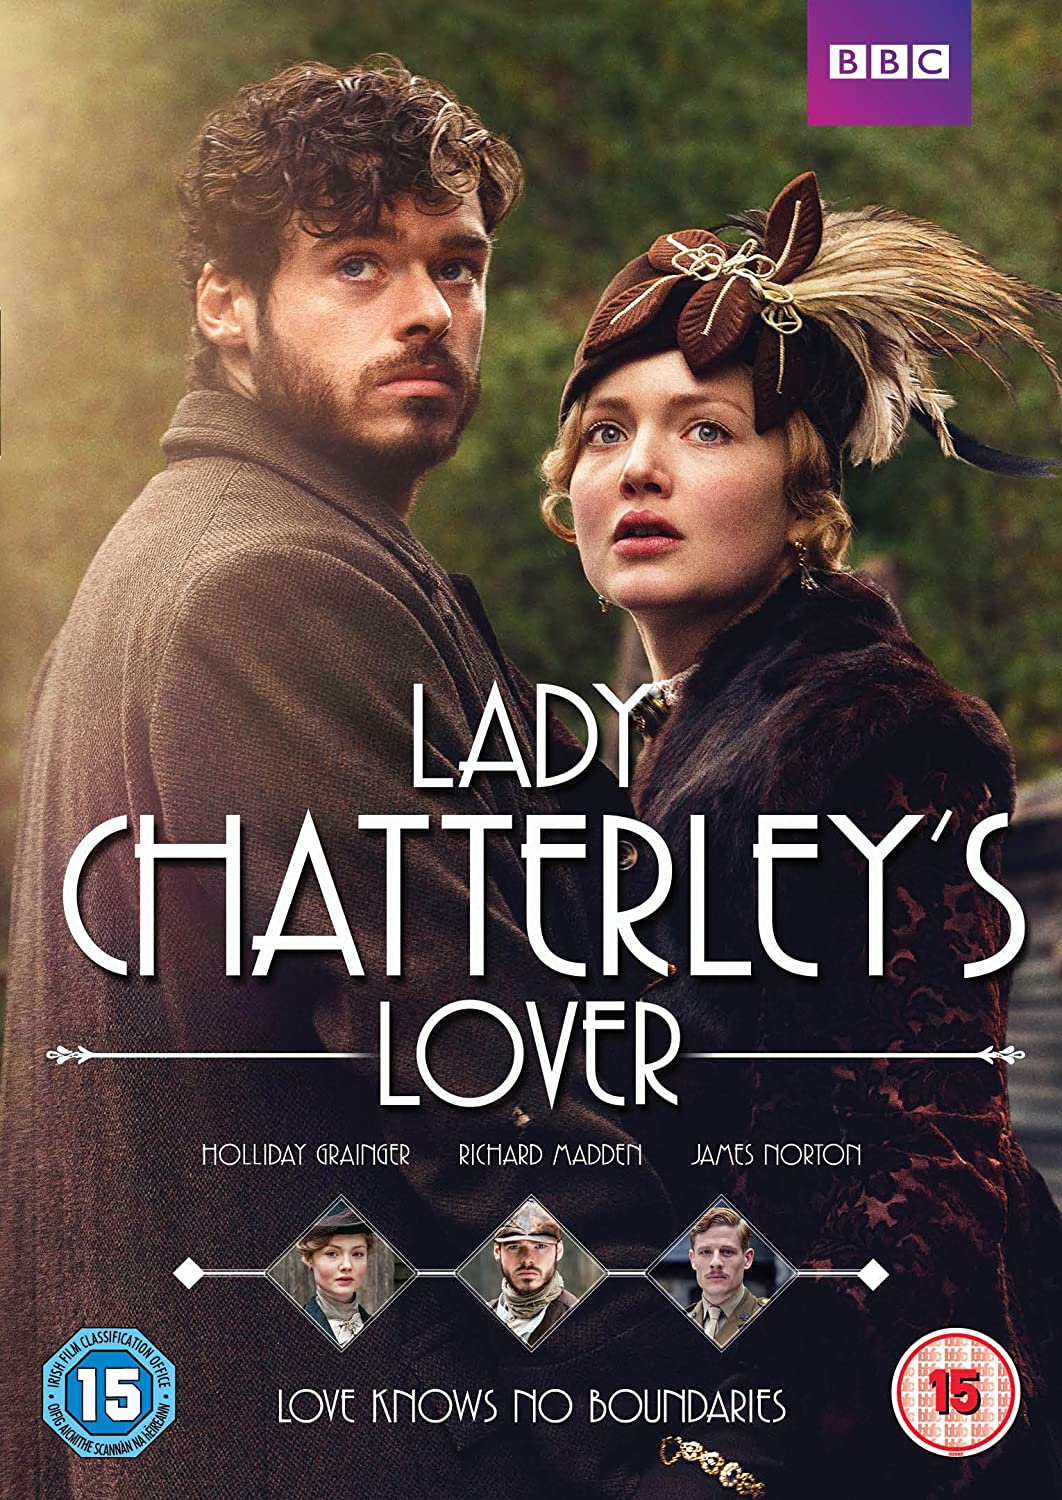 Lady Chatterley's Lover - Romance/Drama [DVD]